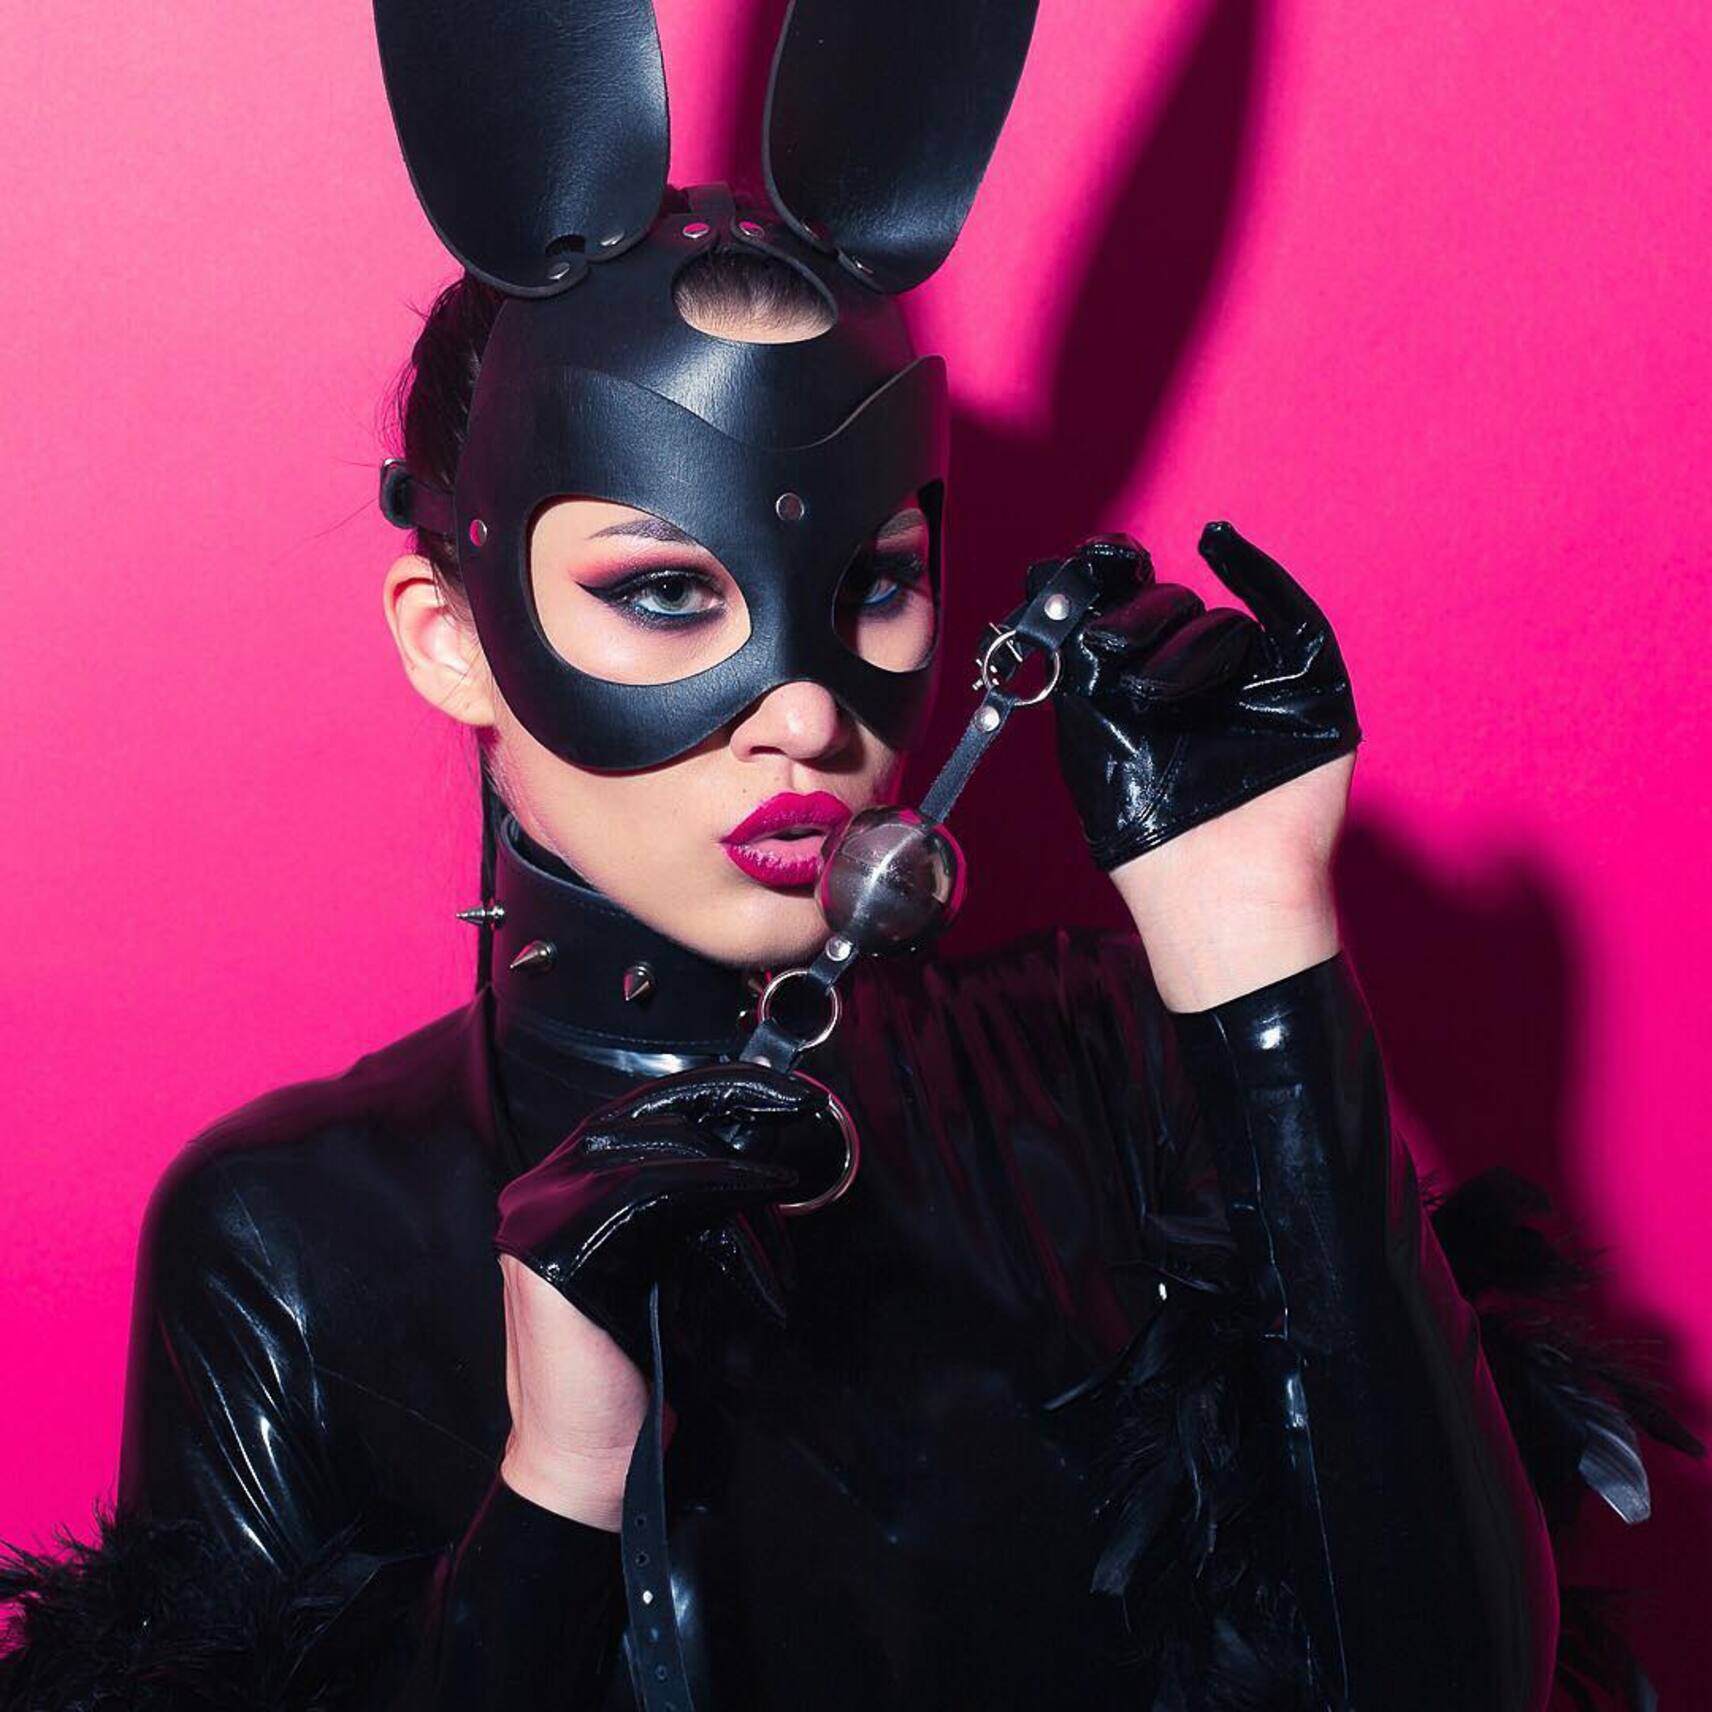 bunny Leather cosplay mask black close-up for half the face with cutouts for the eyes and a clasp at the back for kink parties